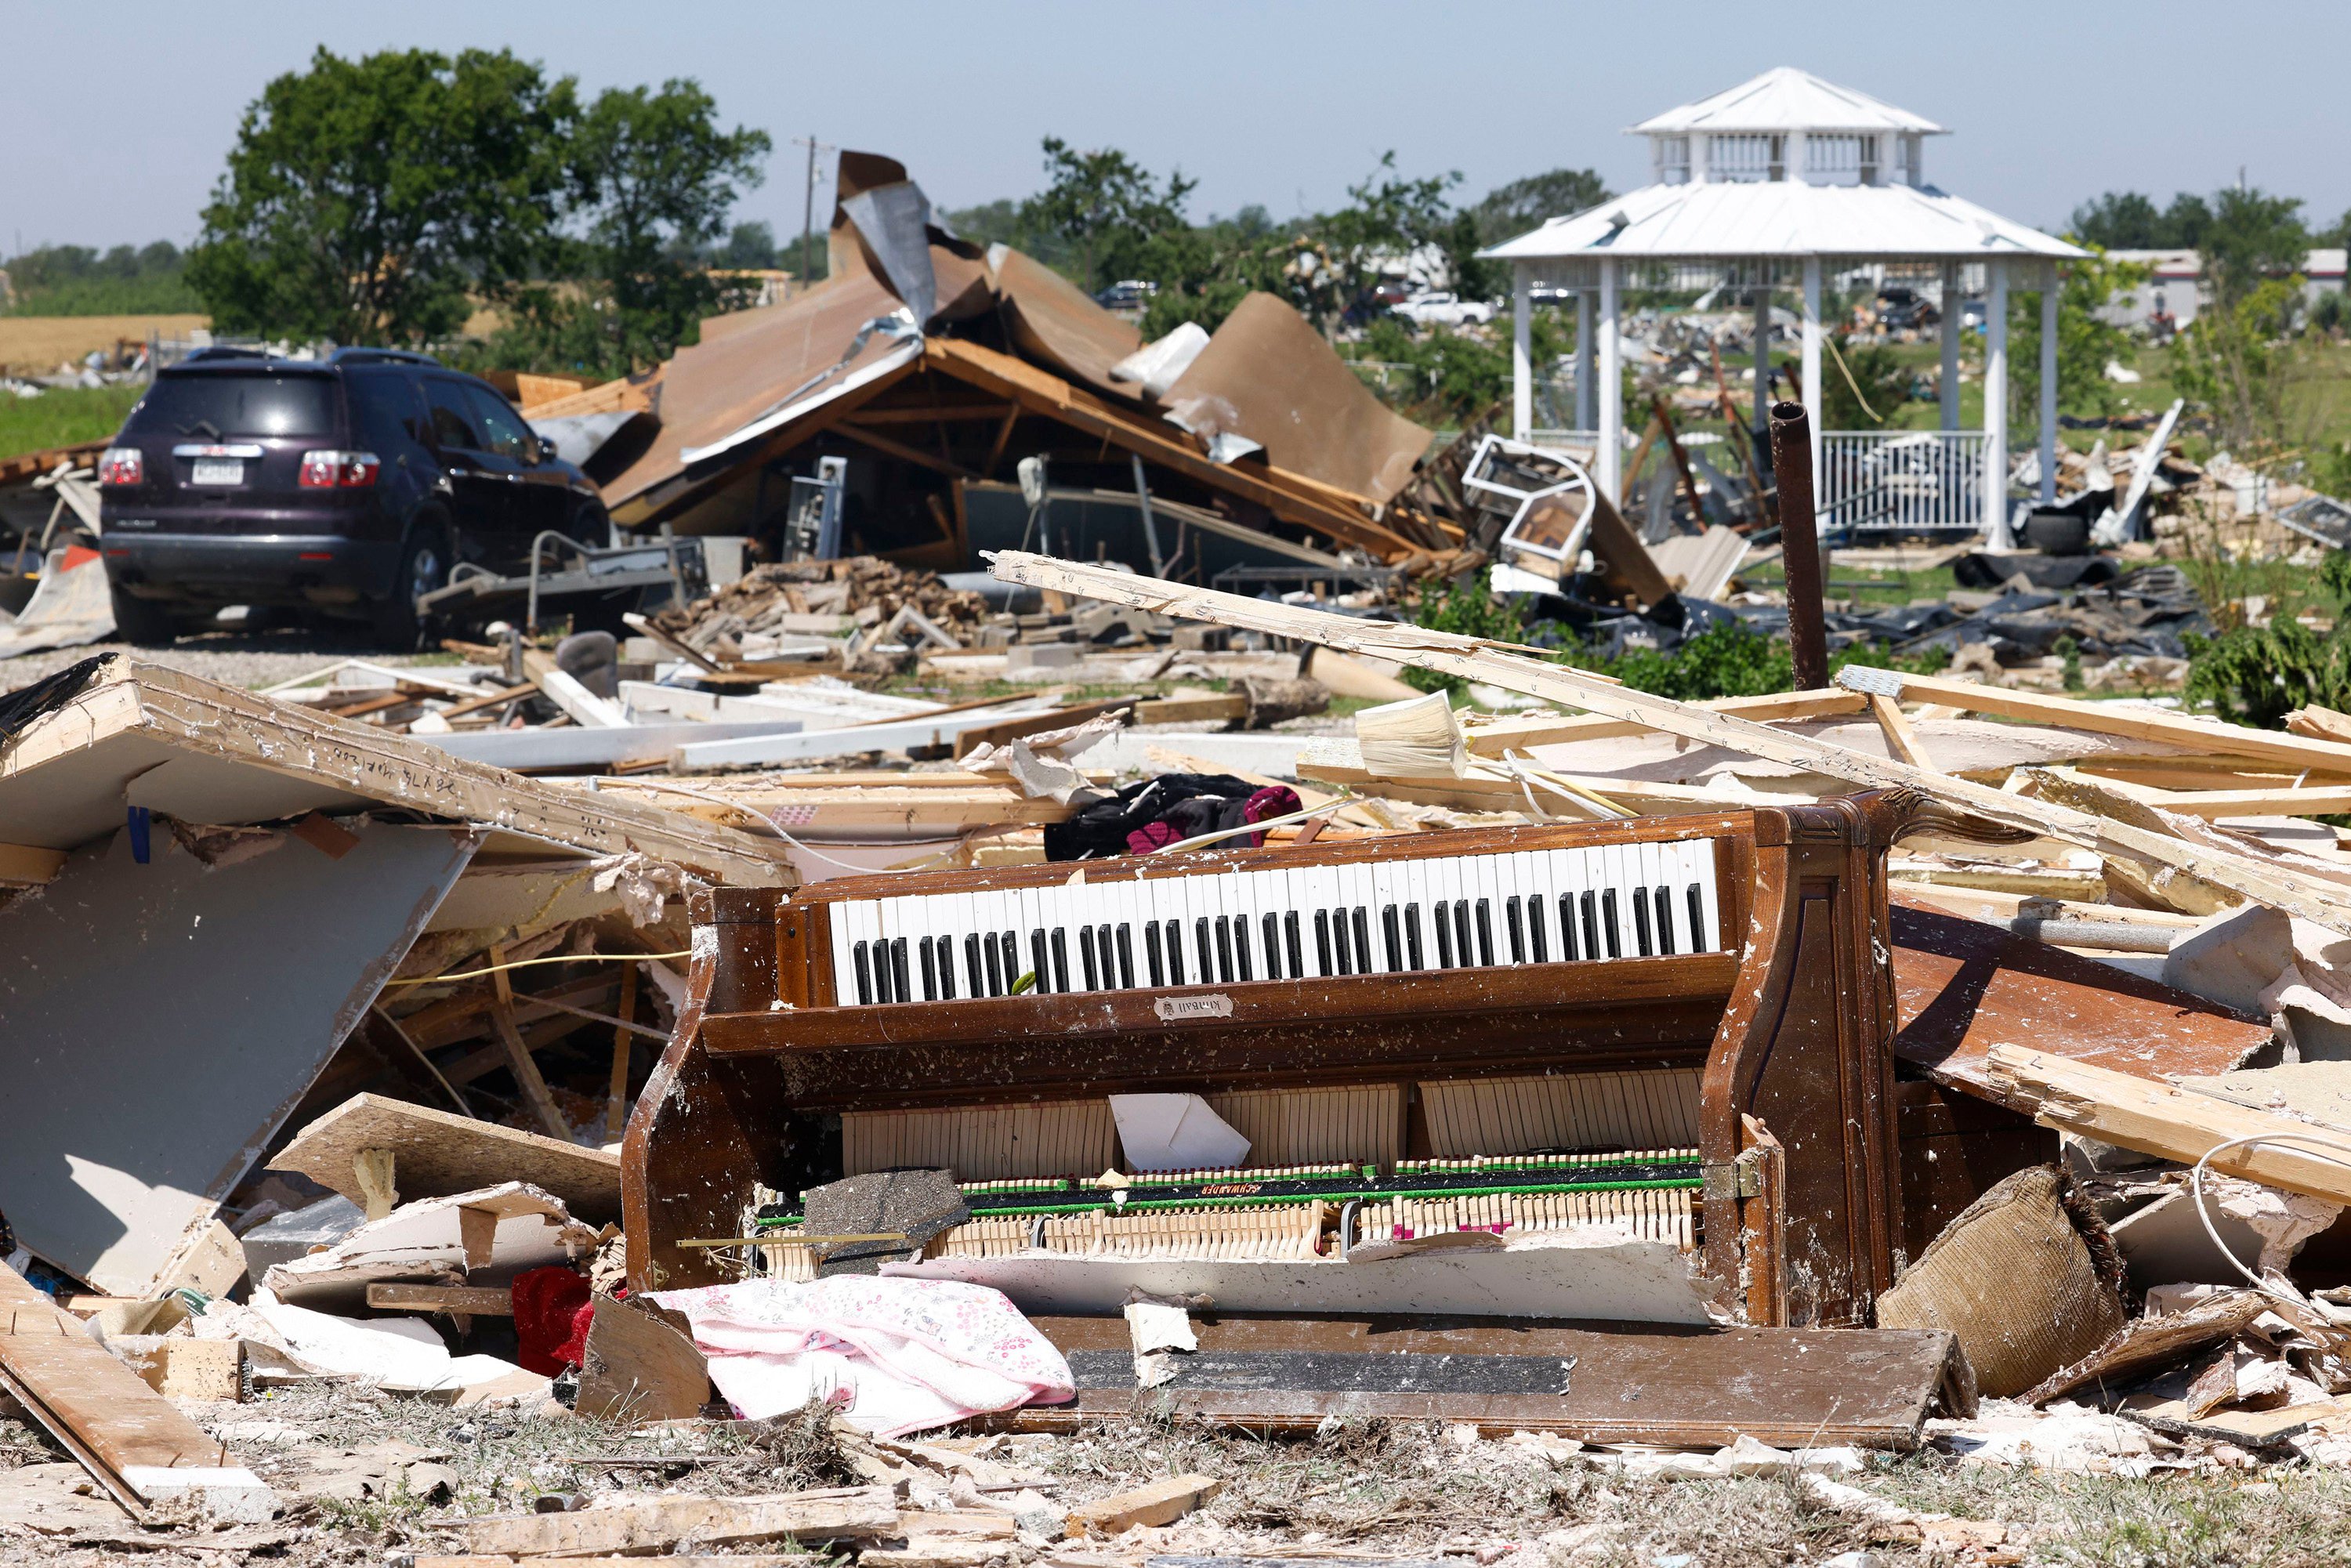 The aftermath of a tornado in Valley View, Texas. Photo: The Dallas Morning News via TNS